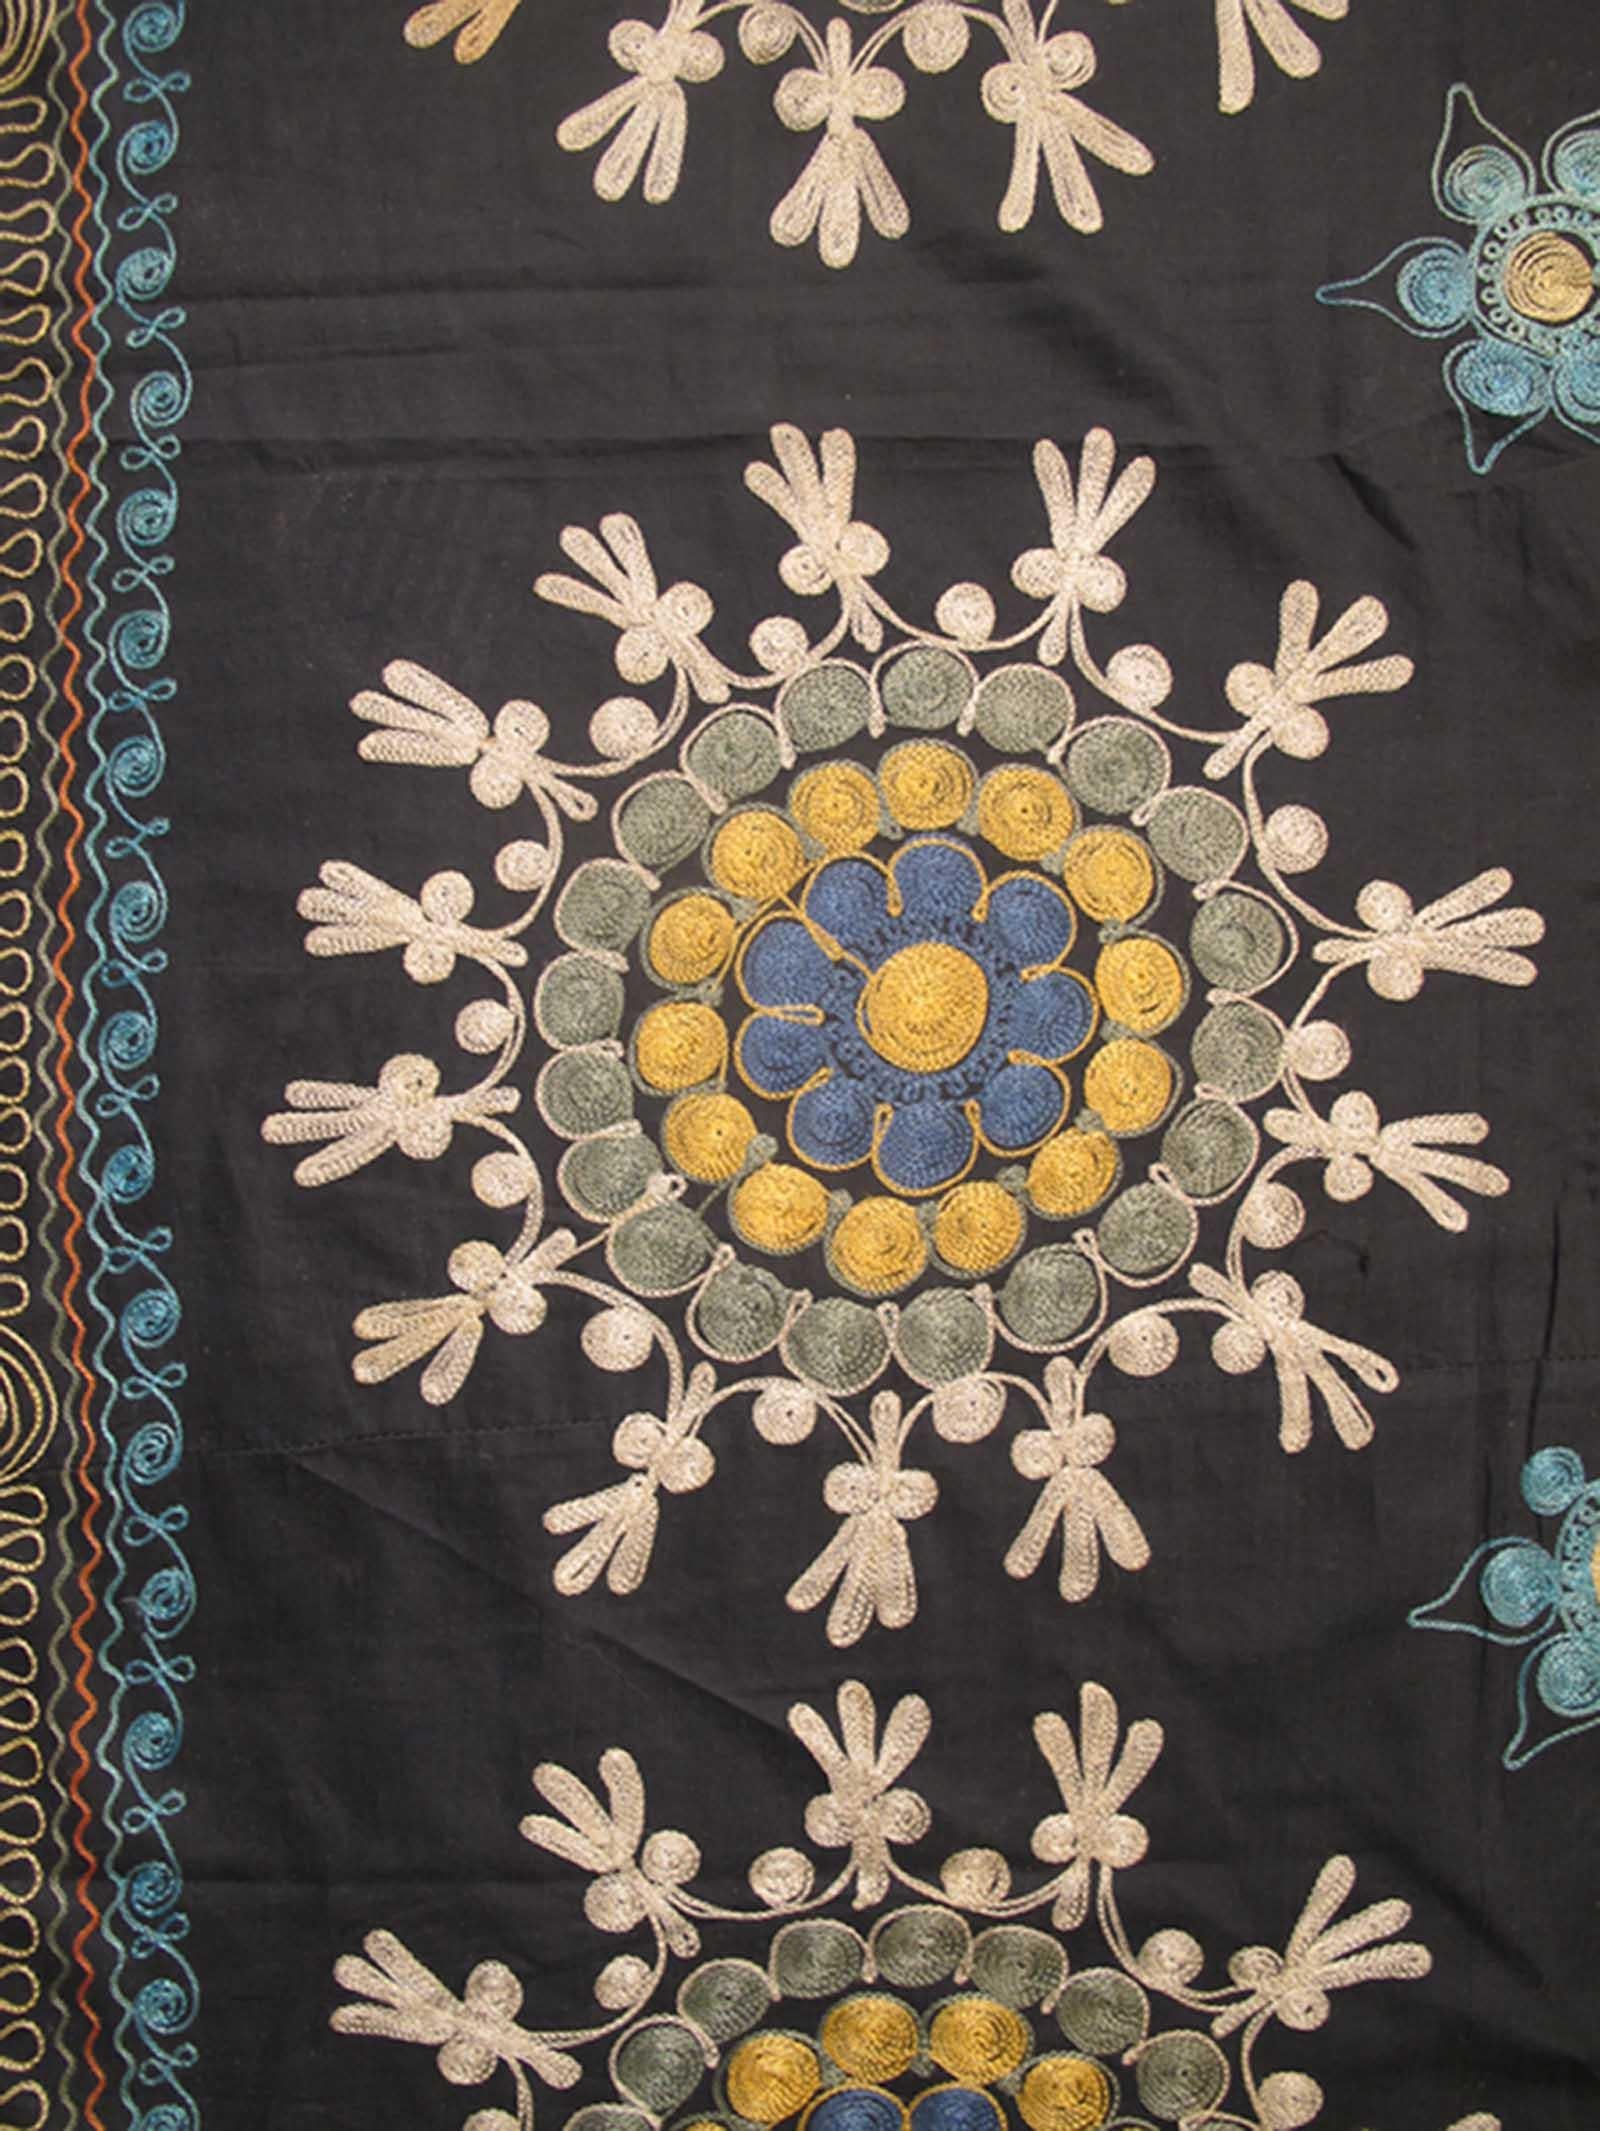 Uzbek Vintage Suzani Embroidery in Black Background with Yellow, Blues and Taupe